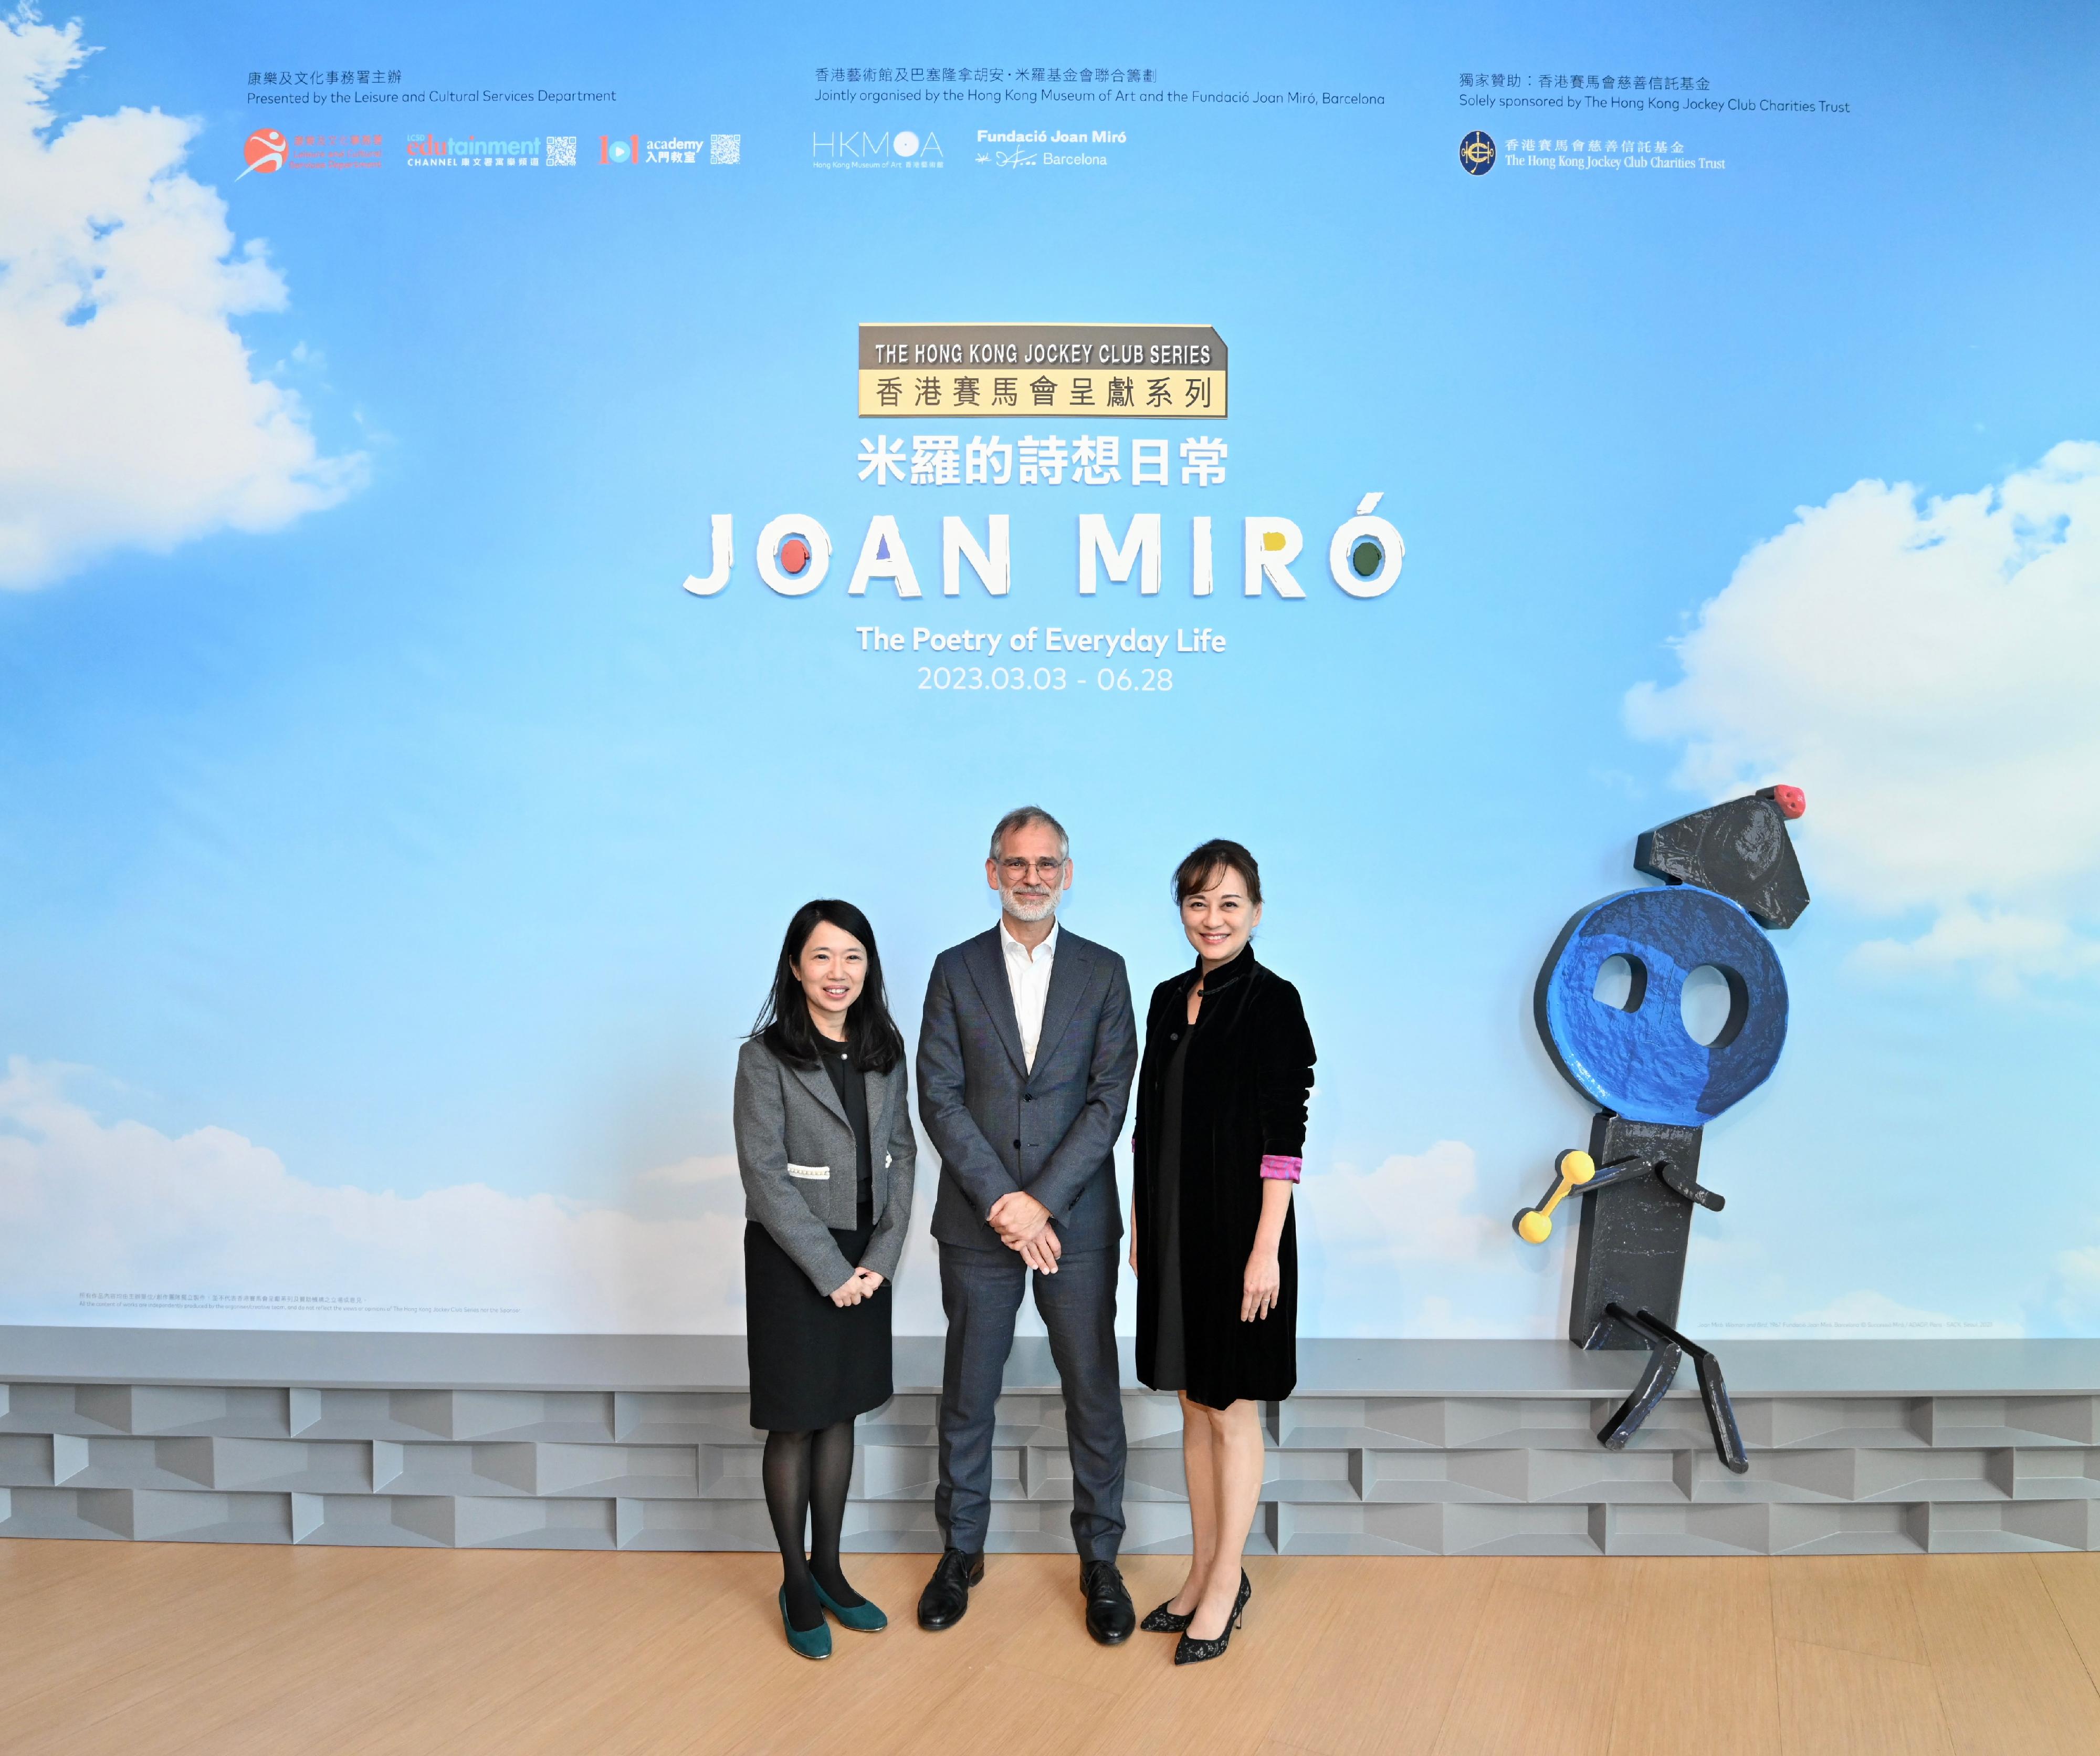 "The Hong Kong Jockey Club Series: Joan Miró — The Poetry of Everyday Life" exhibition will be held at the Hong Kong Museum of Art (HKMoA) starting from tomorrow (March 3). Picture shows (from left) the Curator of the HKMoA (Learning and International Programmes), Ms Lo Yan-yan; the Director of the Fundació Joan Miró, Dr Marko Daniel; and the Museum Director of the HKMoA, Dr Maria Mok, during the press preview today (March 2).